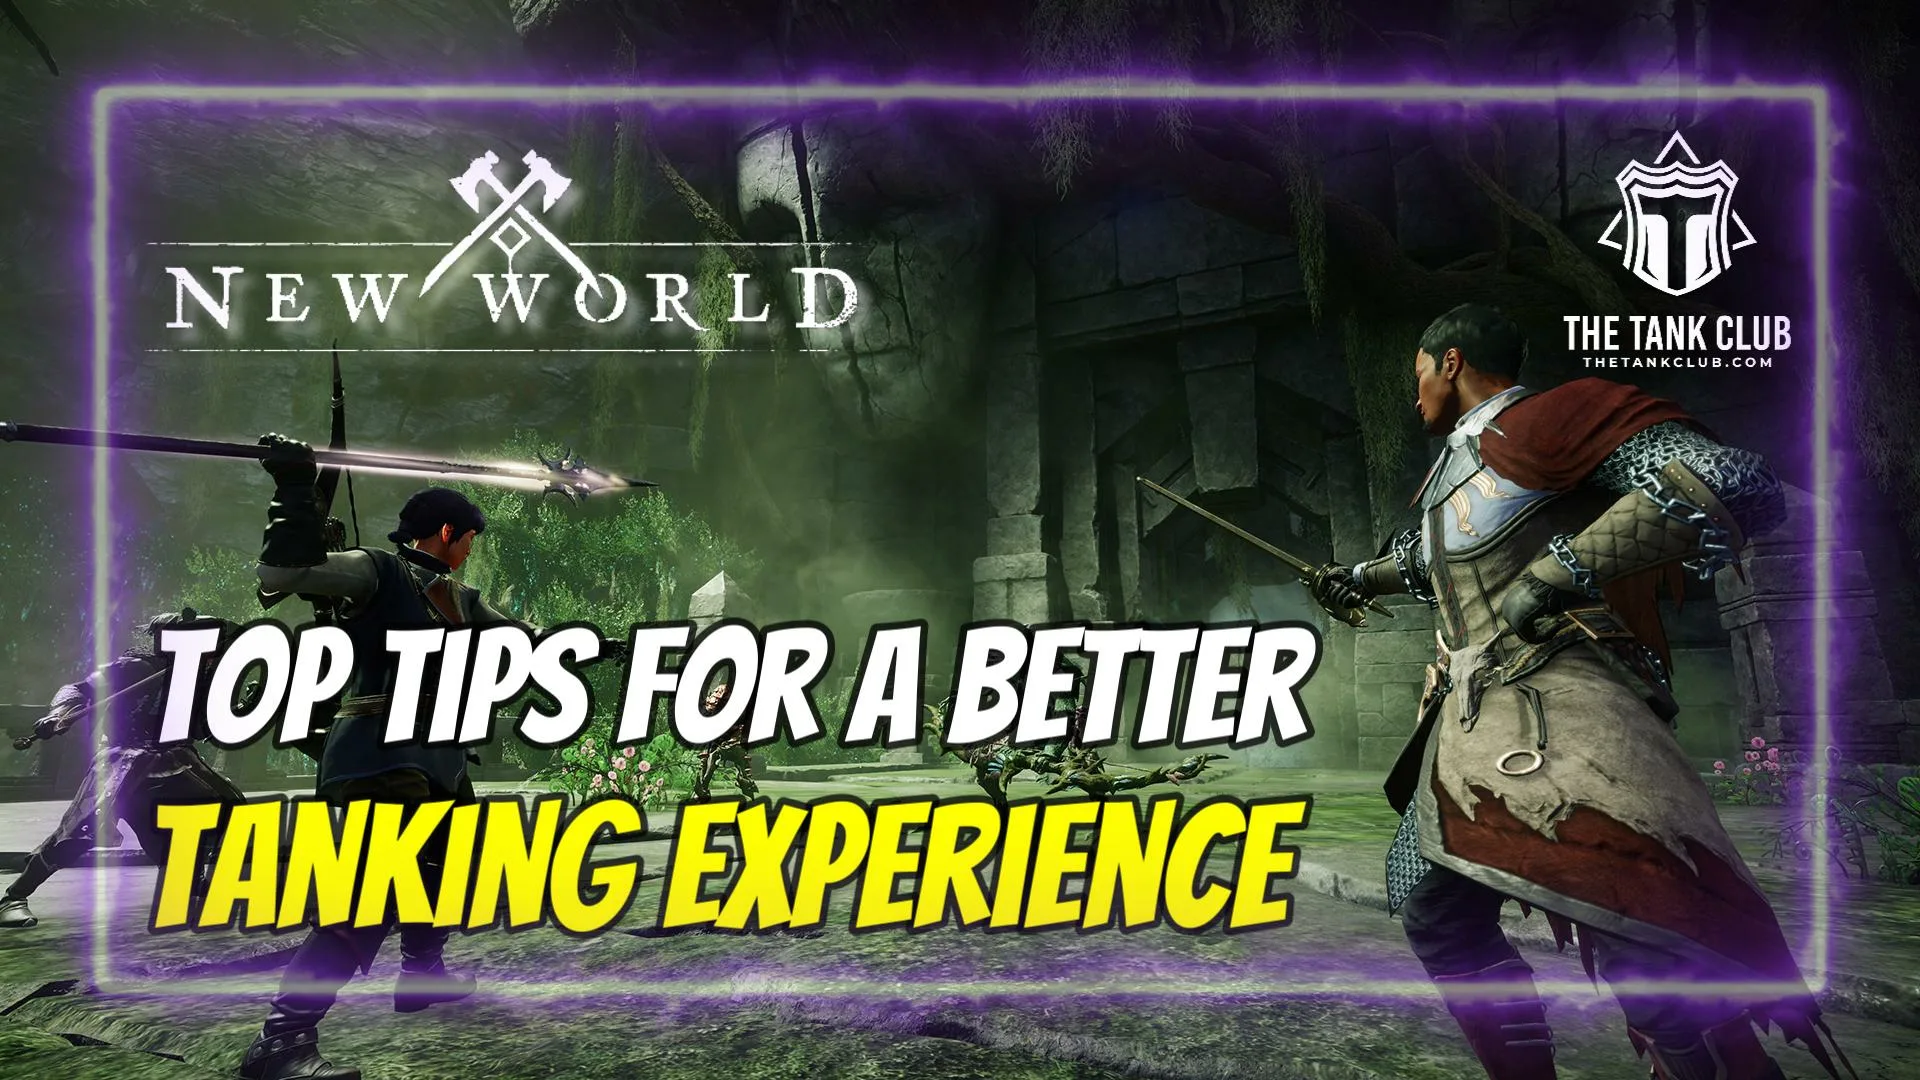 New World Top Tips for a Better Tanking Experience